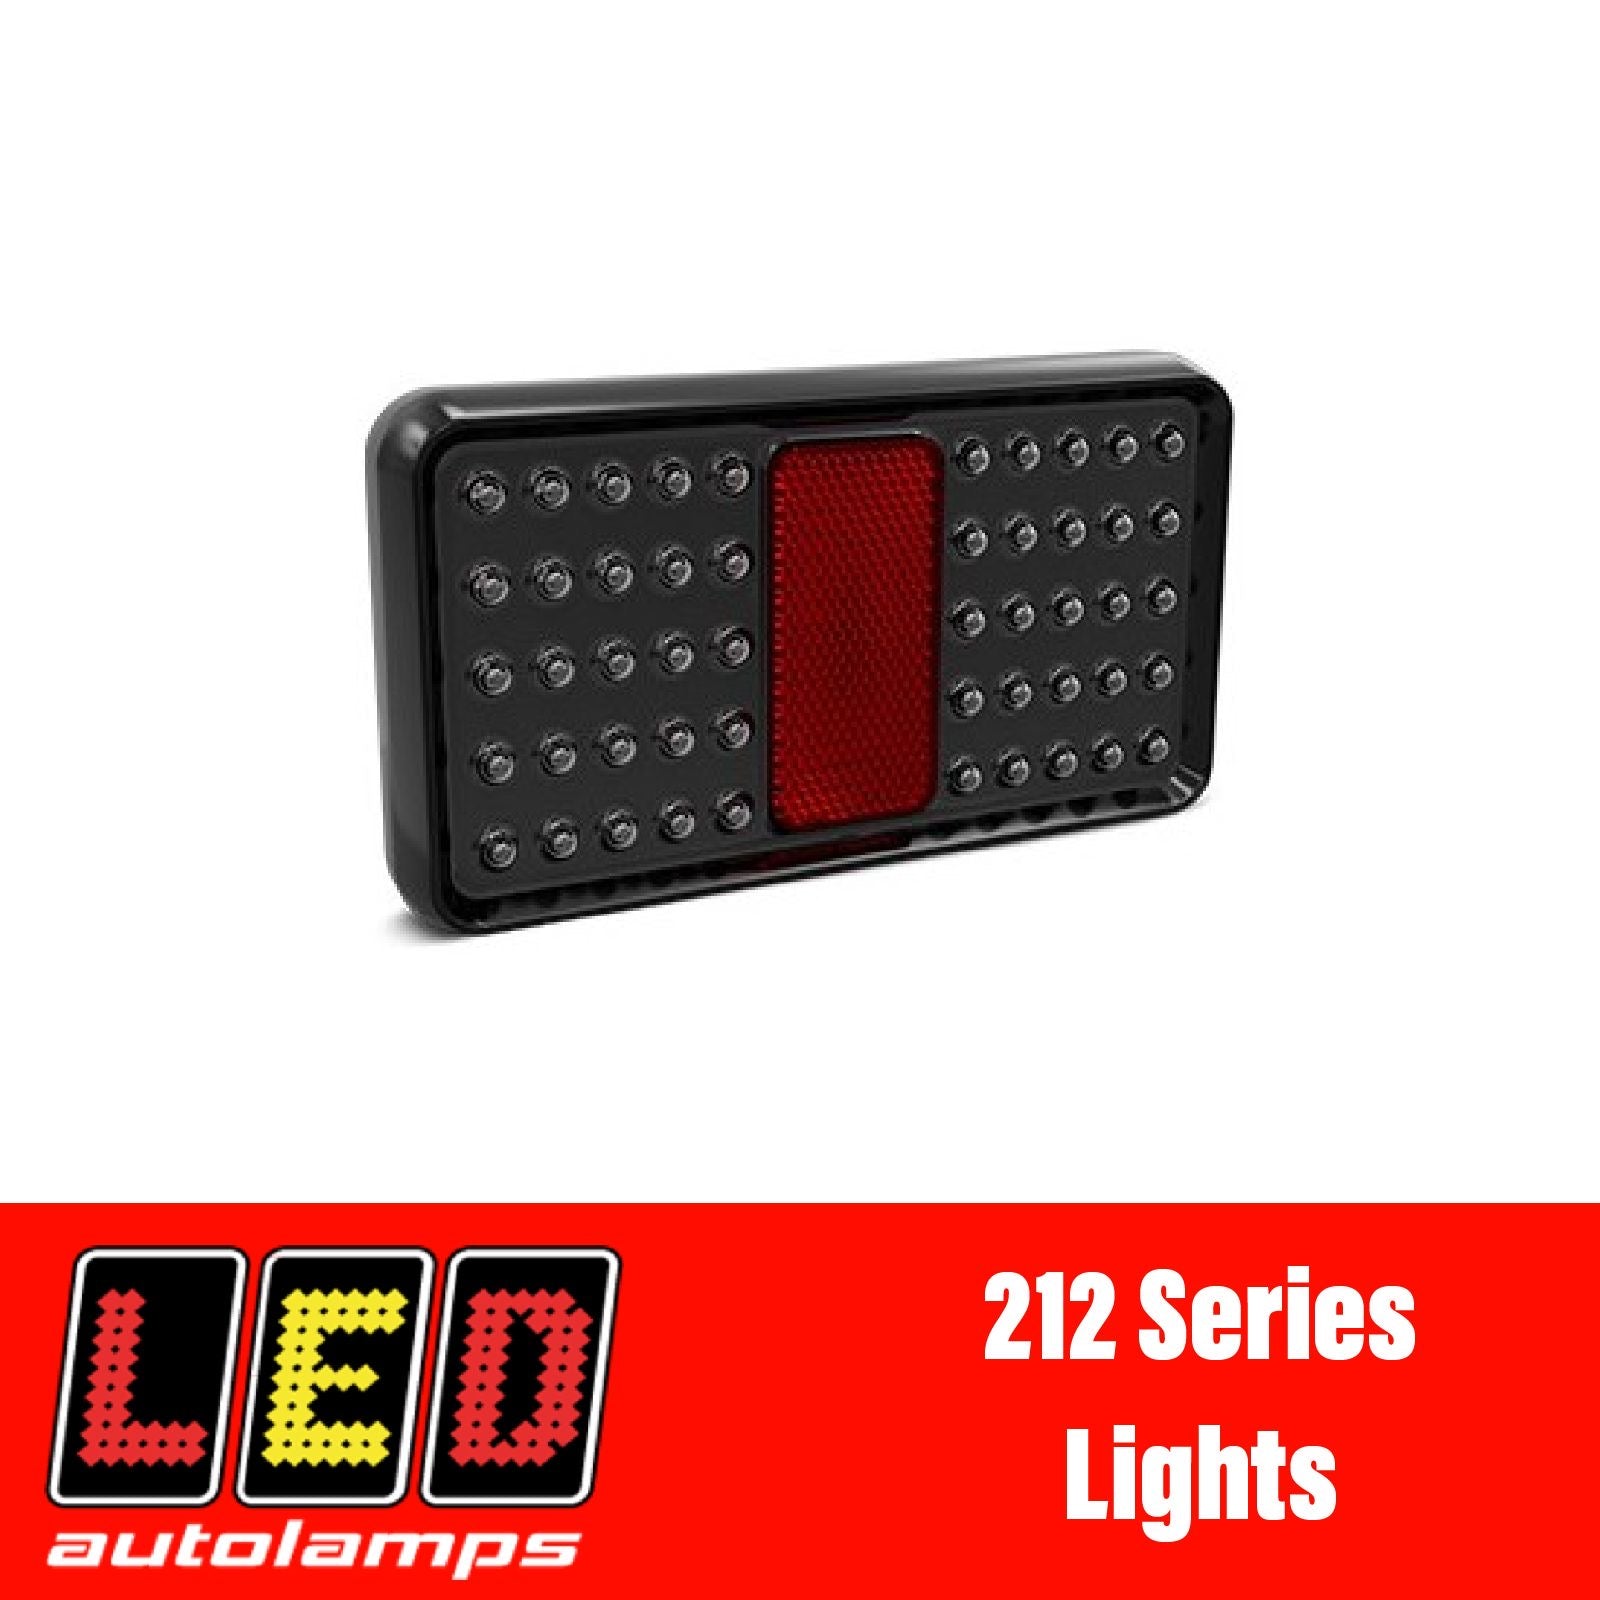 LED AUTOLAMPS 212 Series Boat Trailer LED Lights